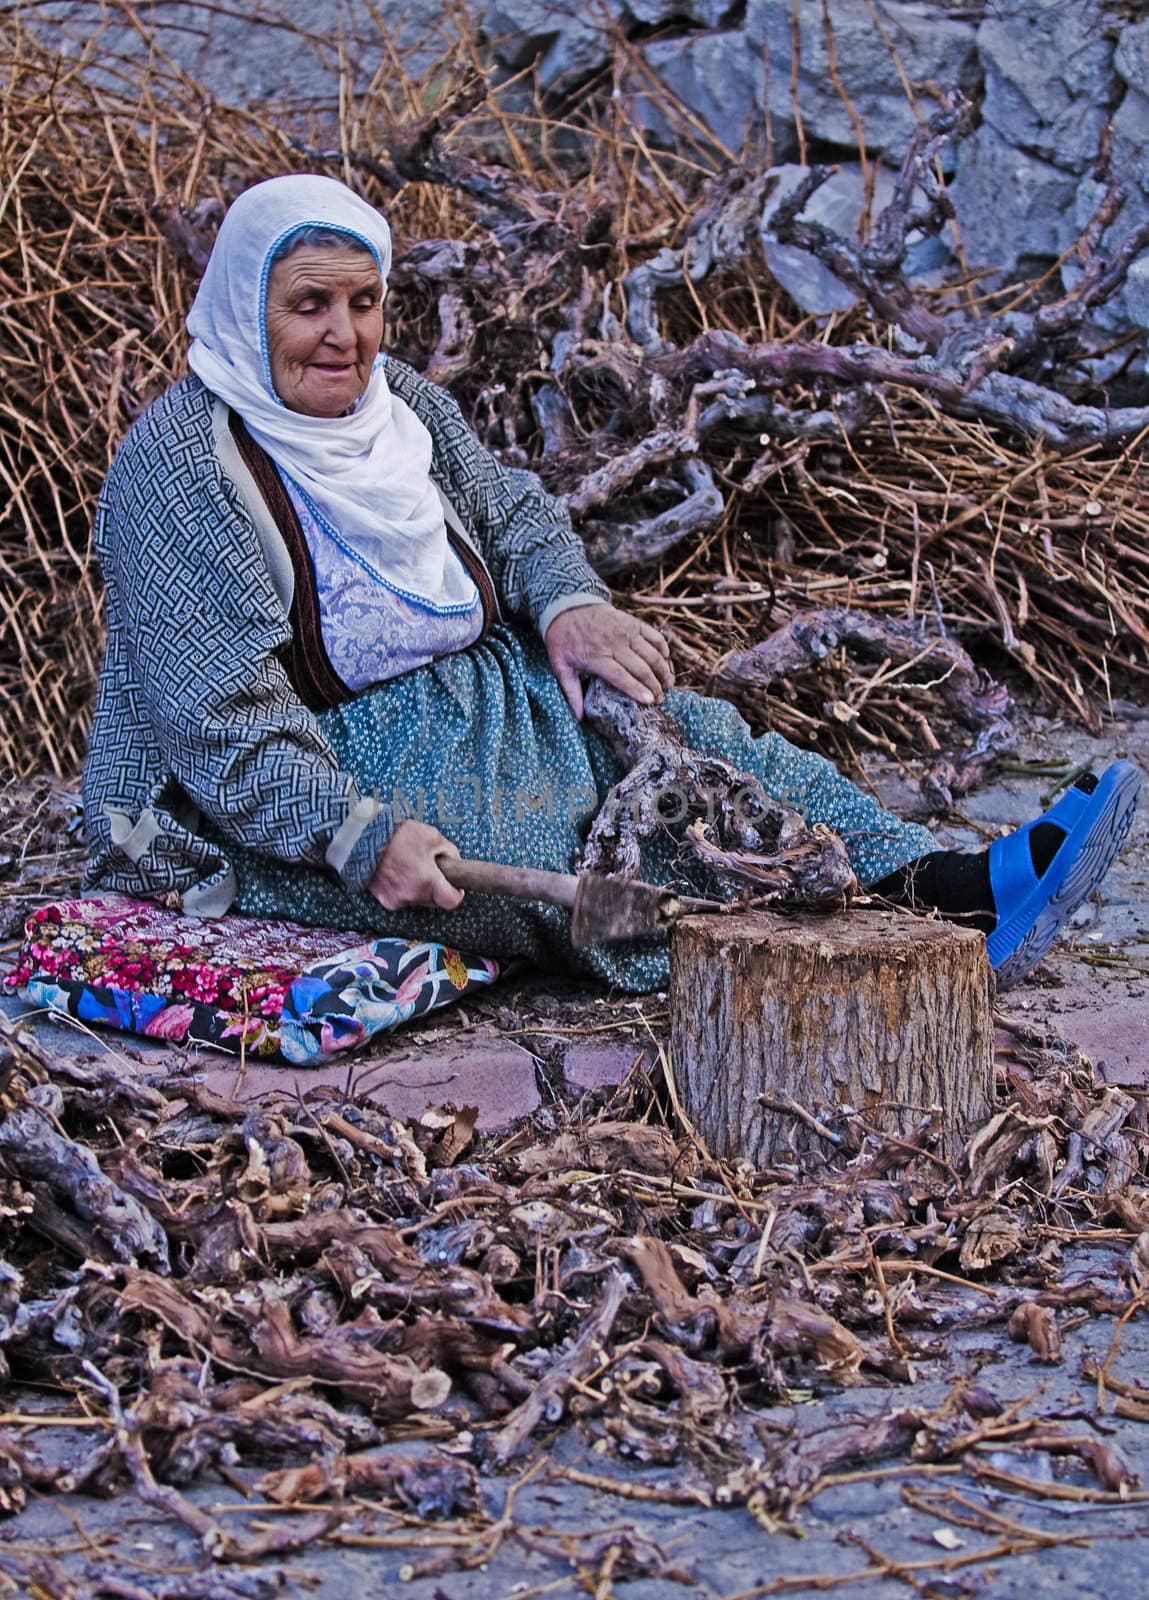 April 2008 village in Turkey - traditional old Turkish woman working outside